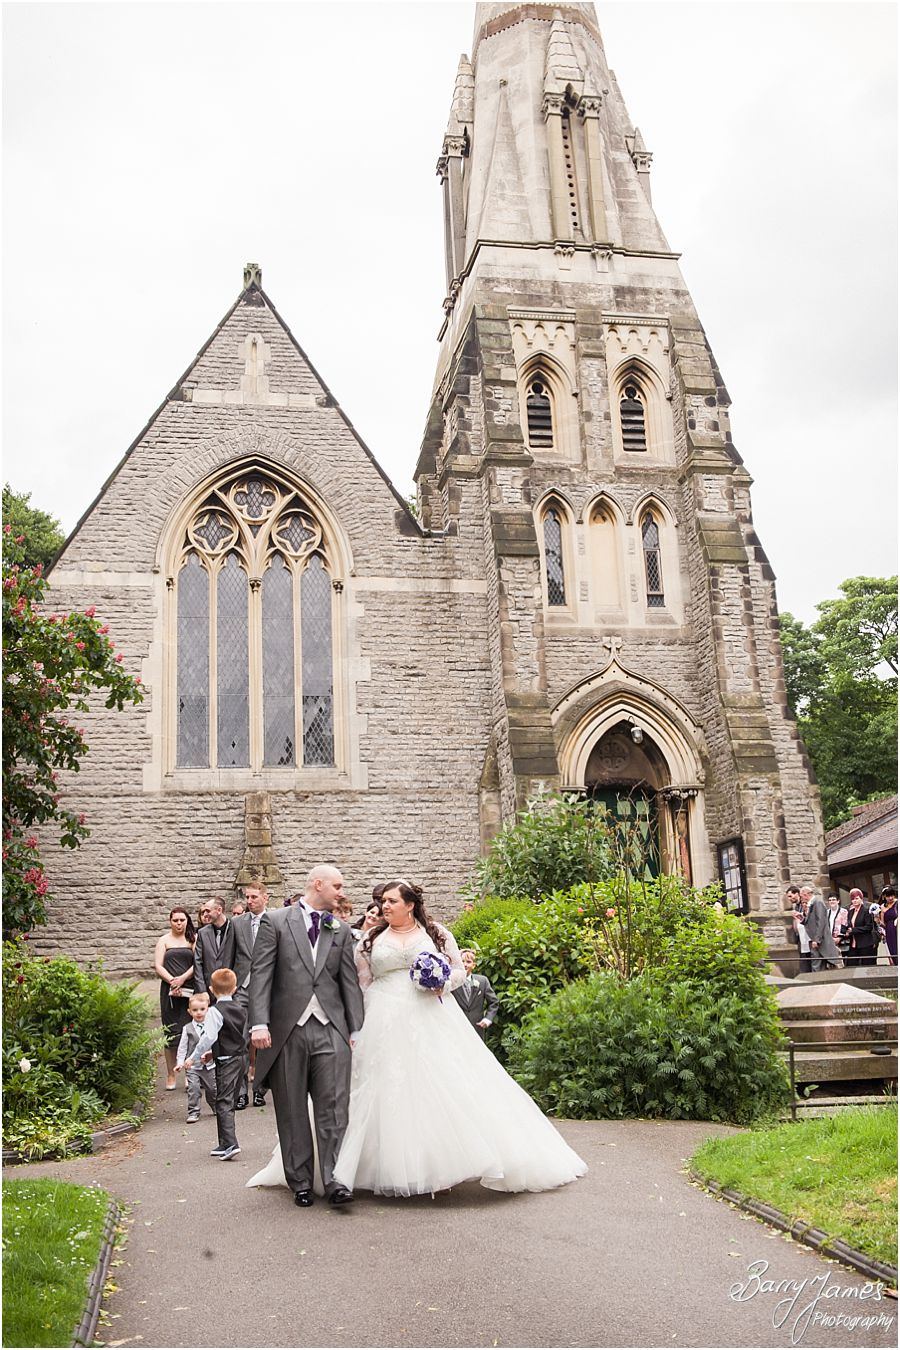 Beautiful storytelling wedding photography at Rushall Parish Church in Walsall by Professional Full Time Wedding Photographer Barry James